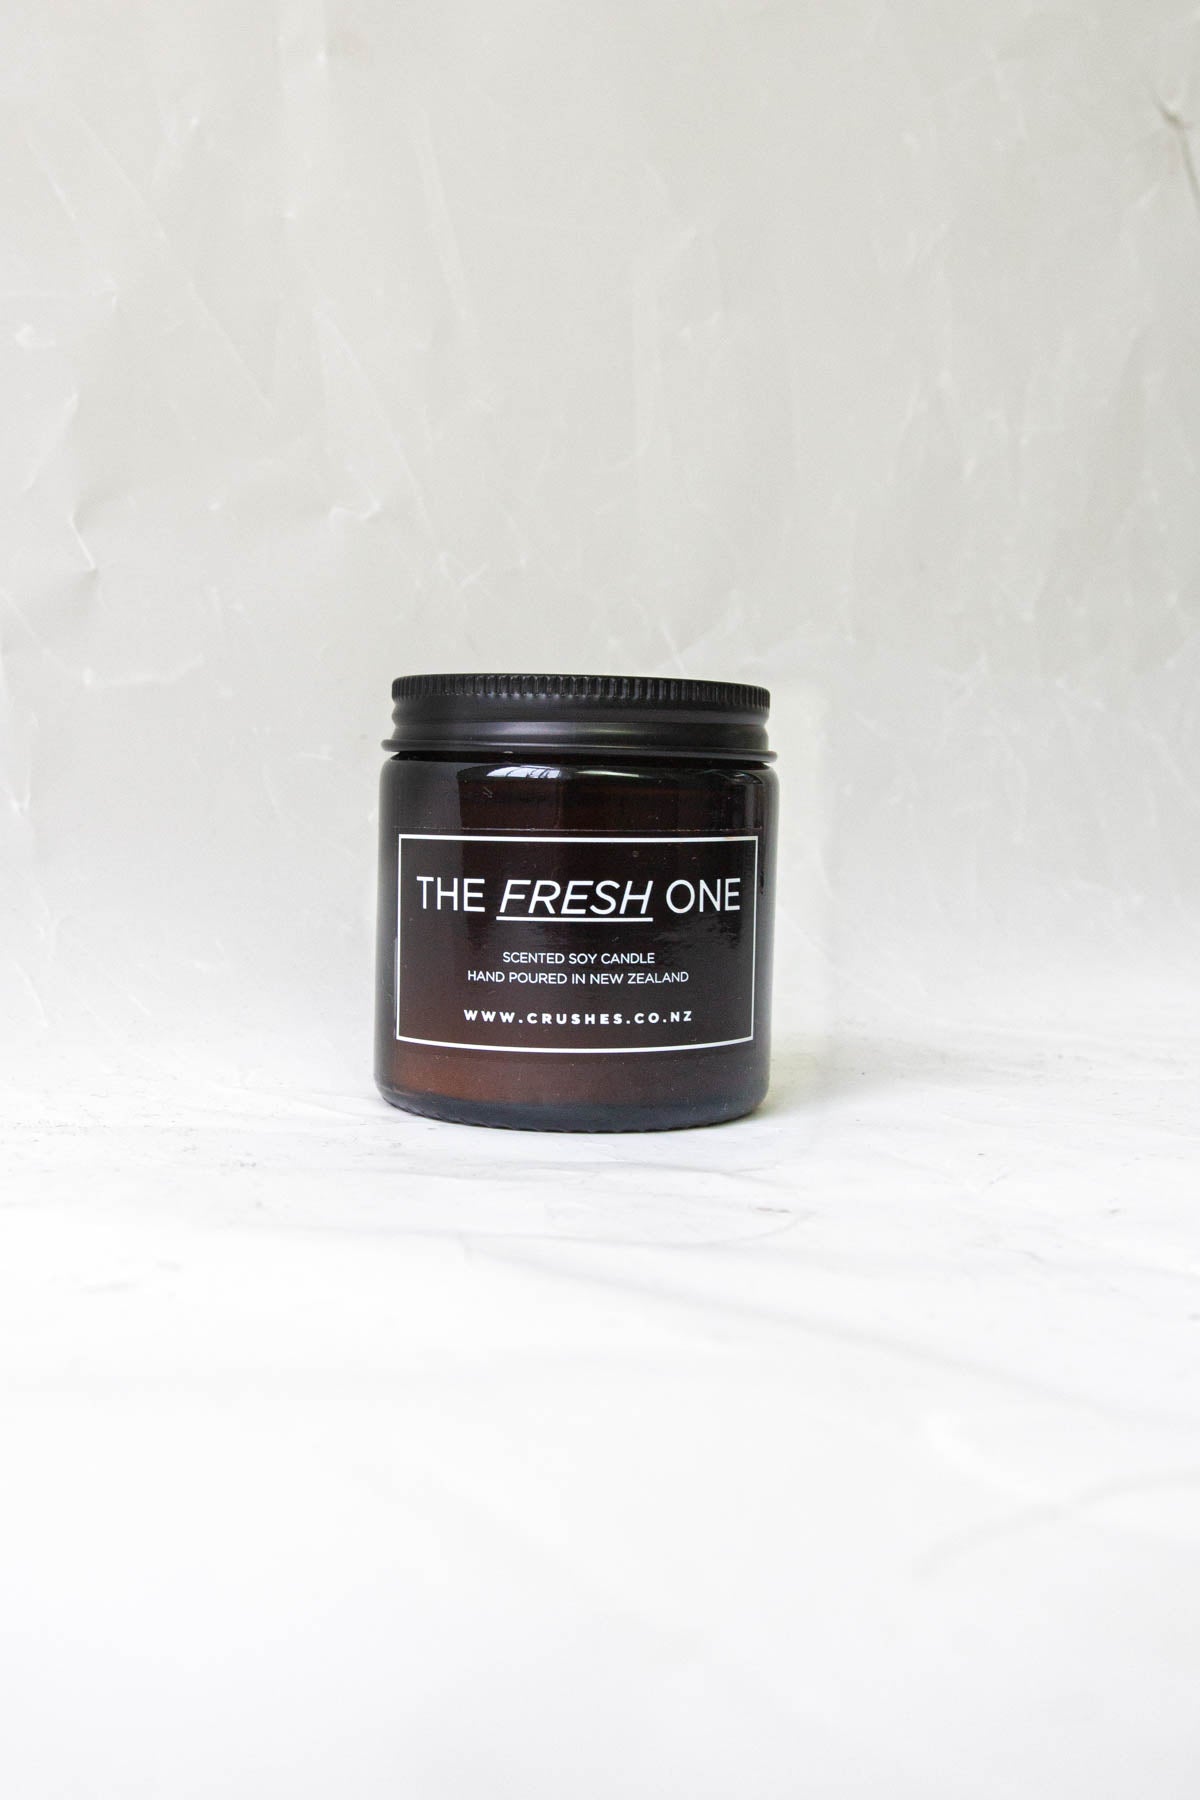 The Fresh One - Scented Soy Candle